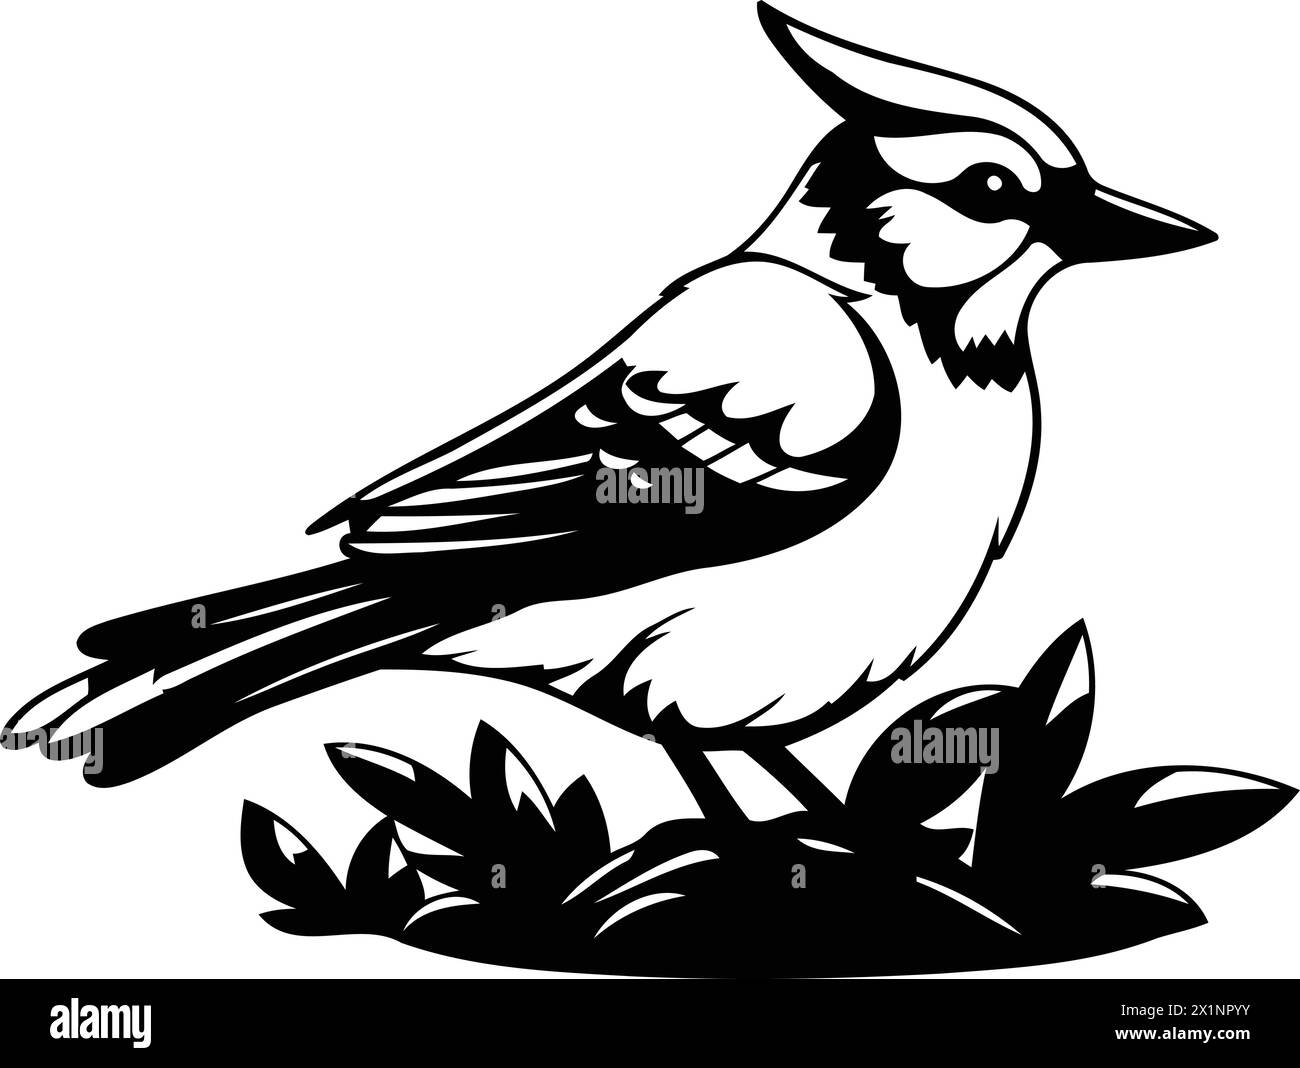 Blue jay bird isolated on a white background. Vector illustration. Stock Vector